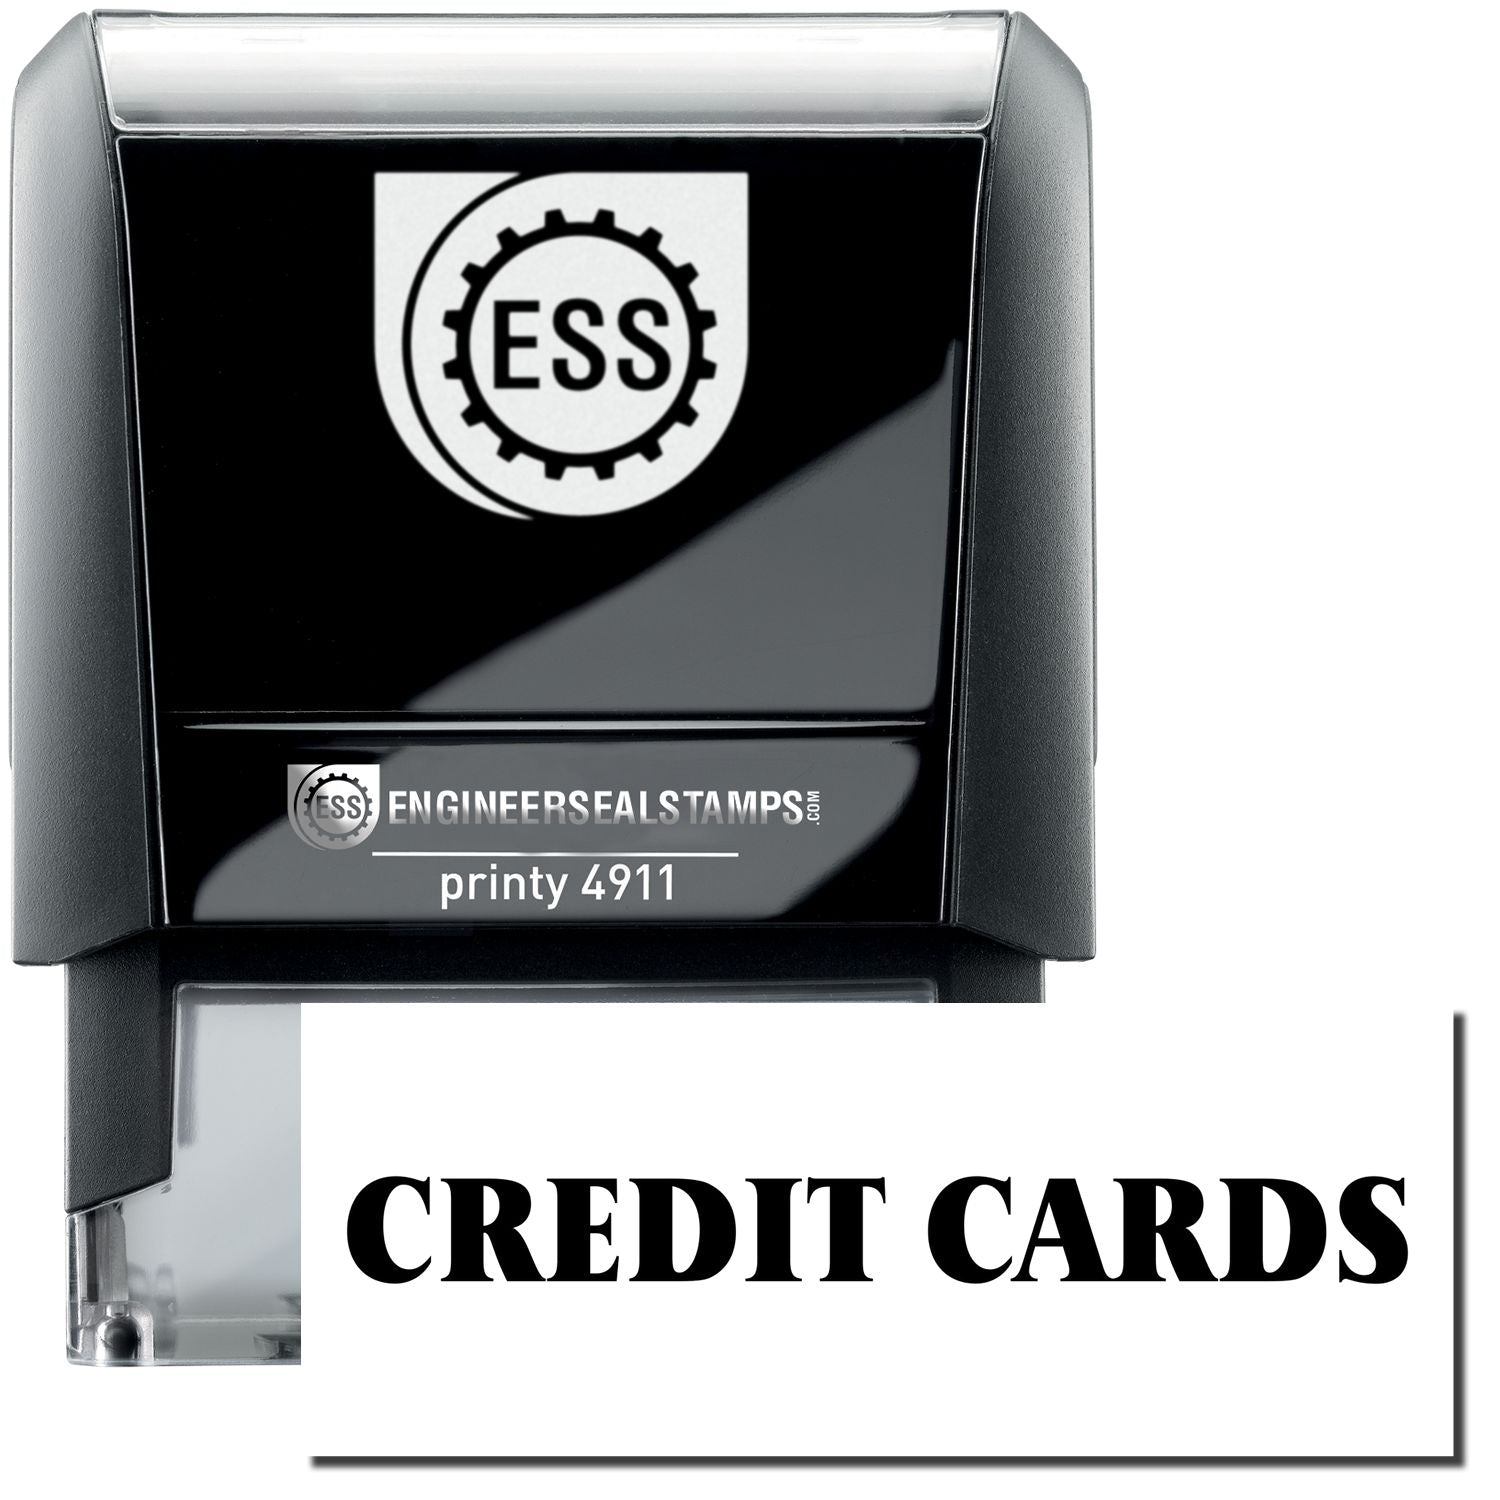 A self-inking stamp with a stamped image showing how the text "CREDIT CARDS" is displayed after stamping.